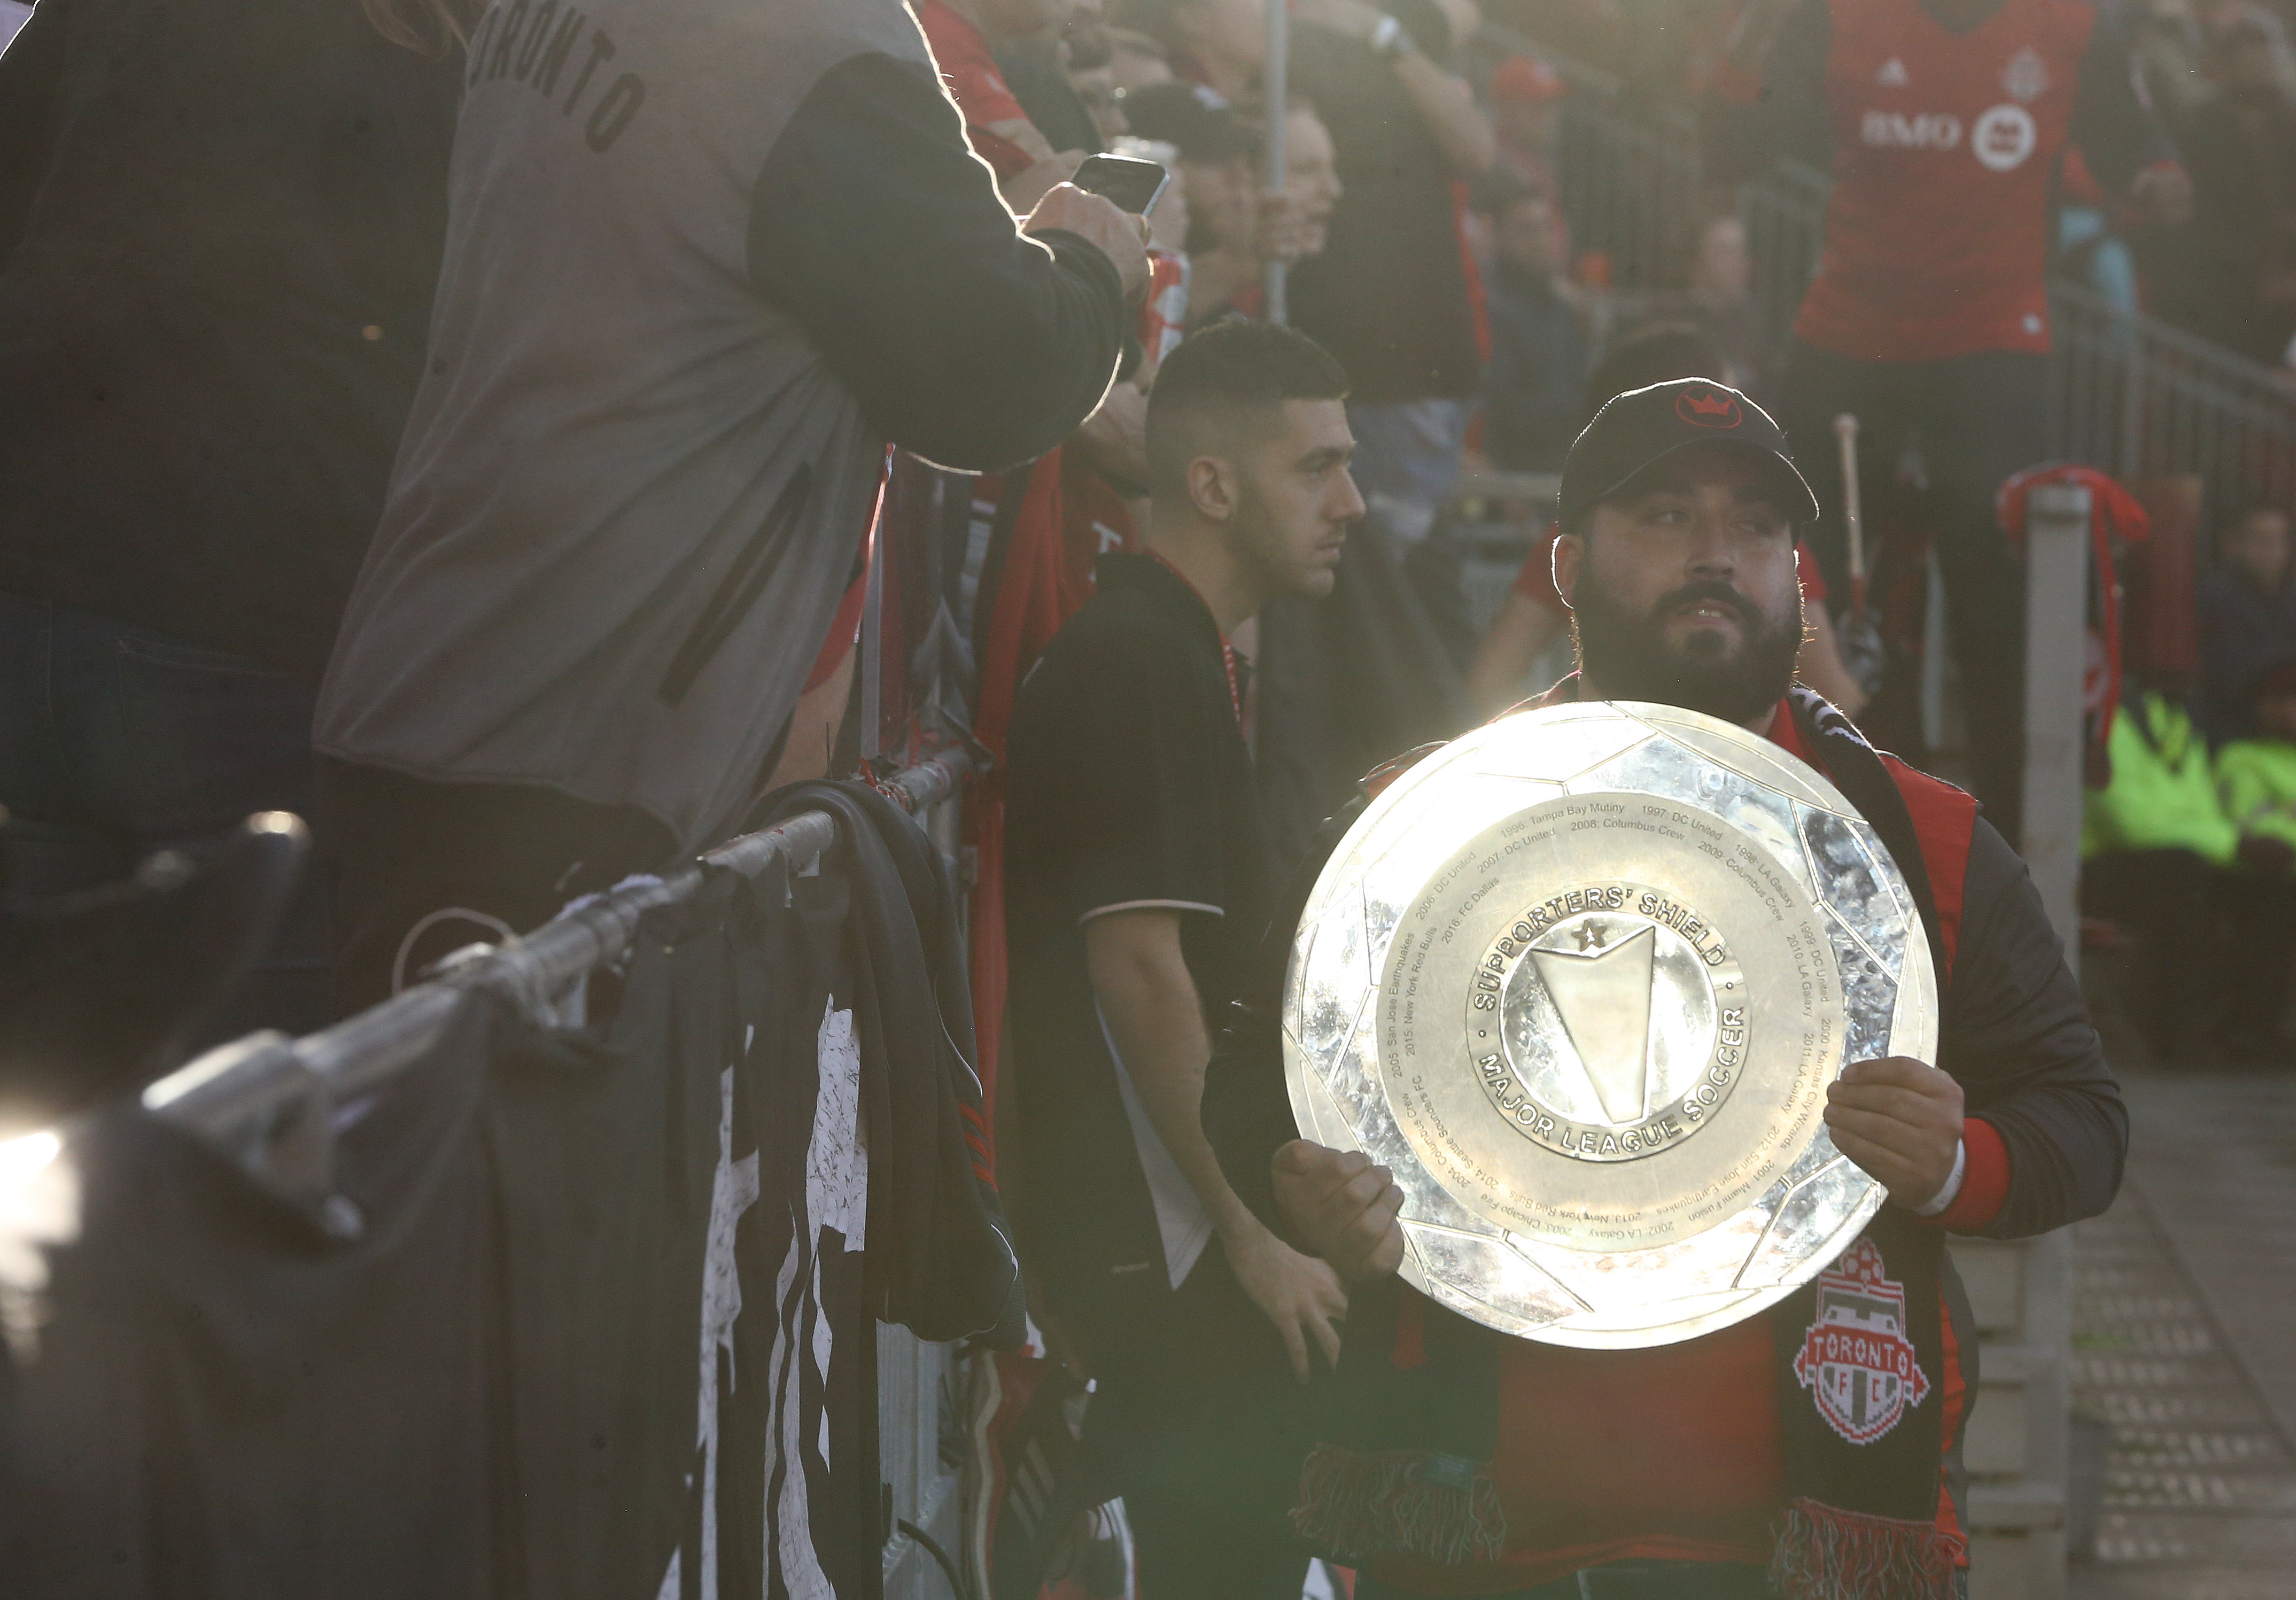 Toronto FC play the Montreal Impact on the day they are awarded the Supporters Shield